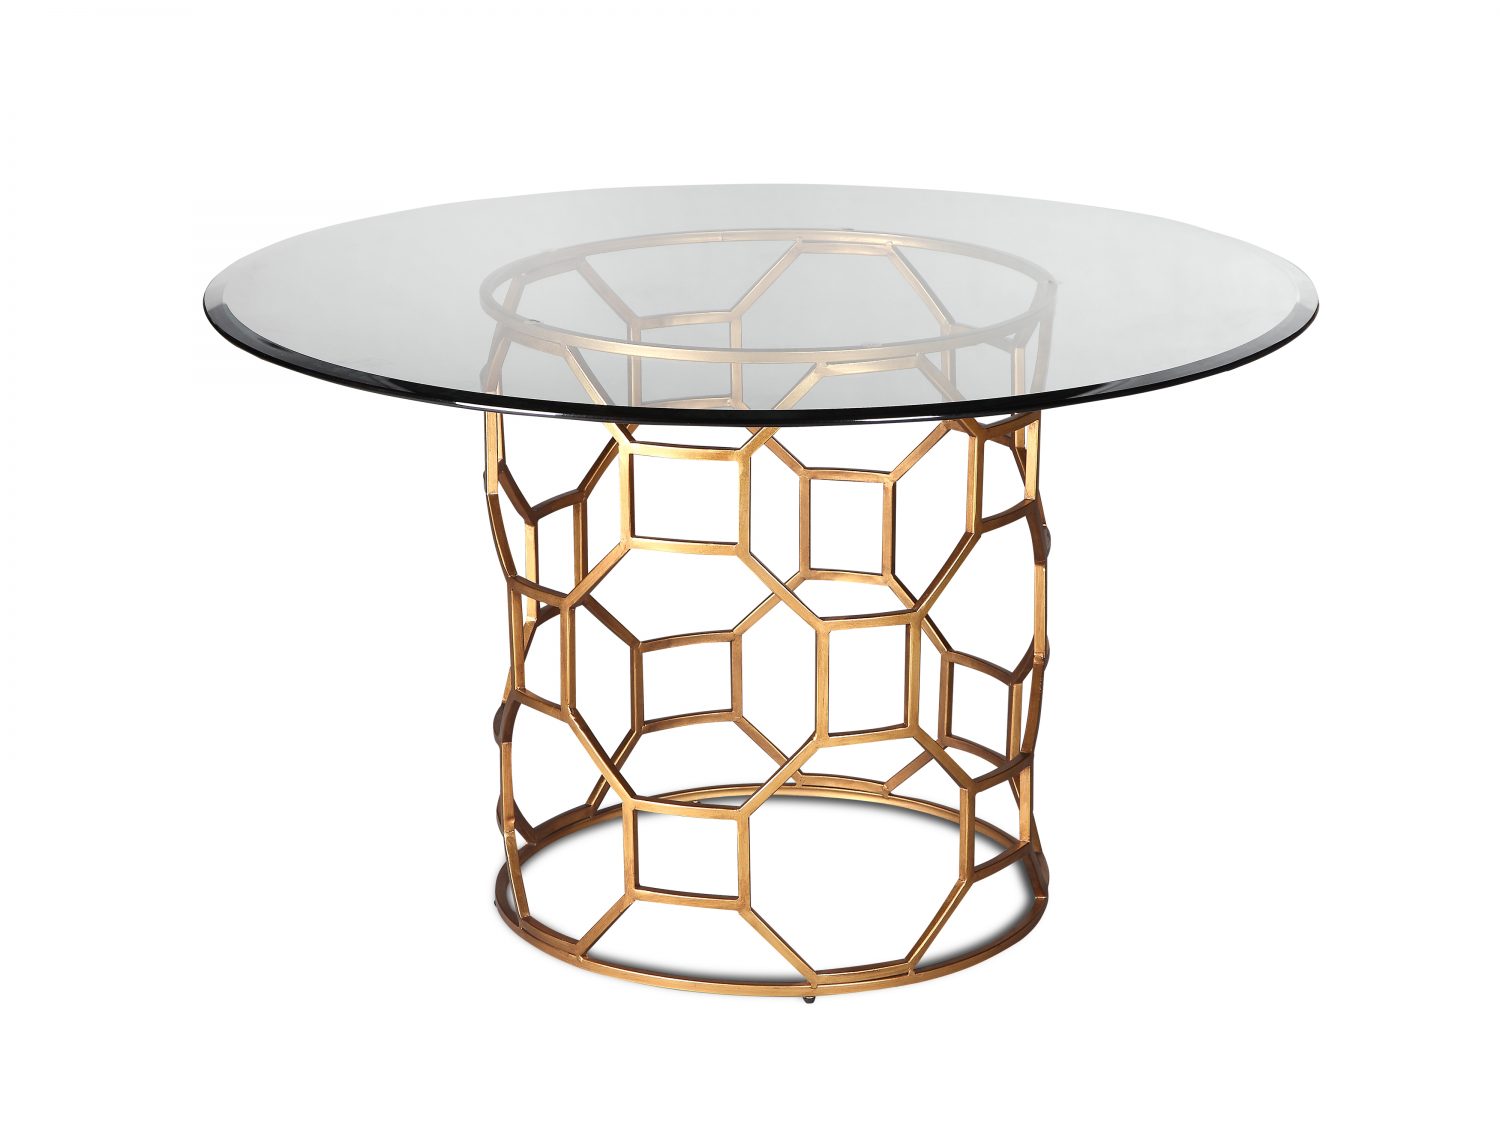  Olivia's-Liang & Eimil Central Dining Table Antique Gold | Outlet- 309 